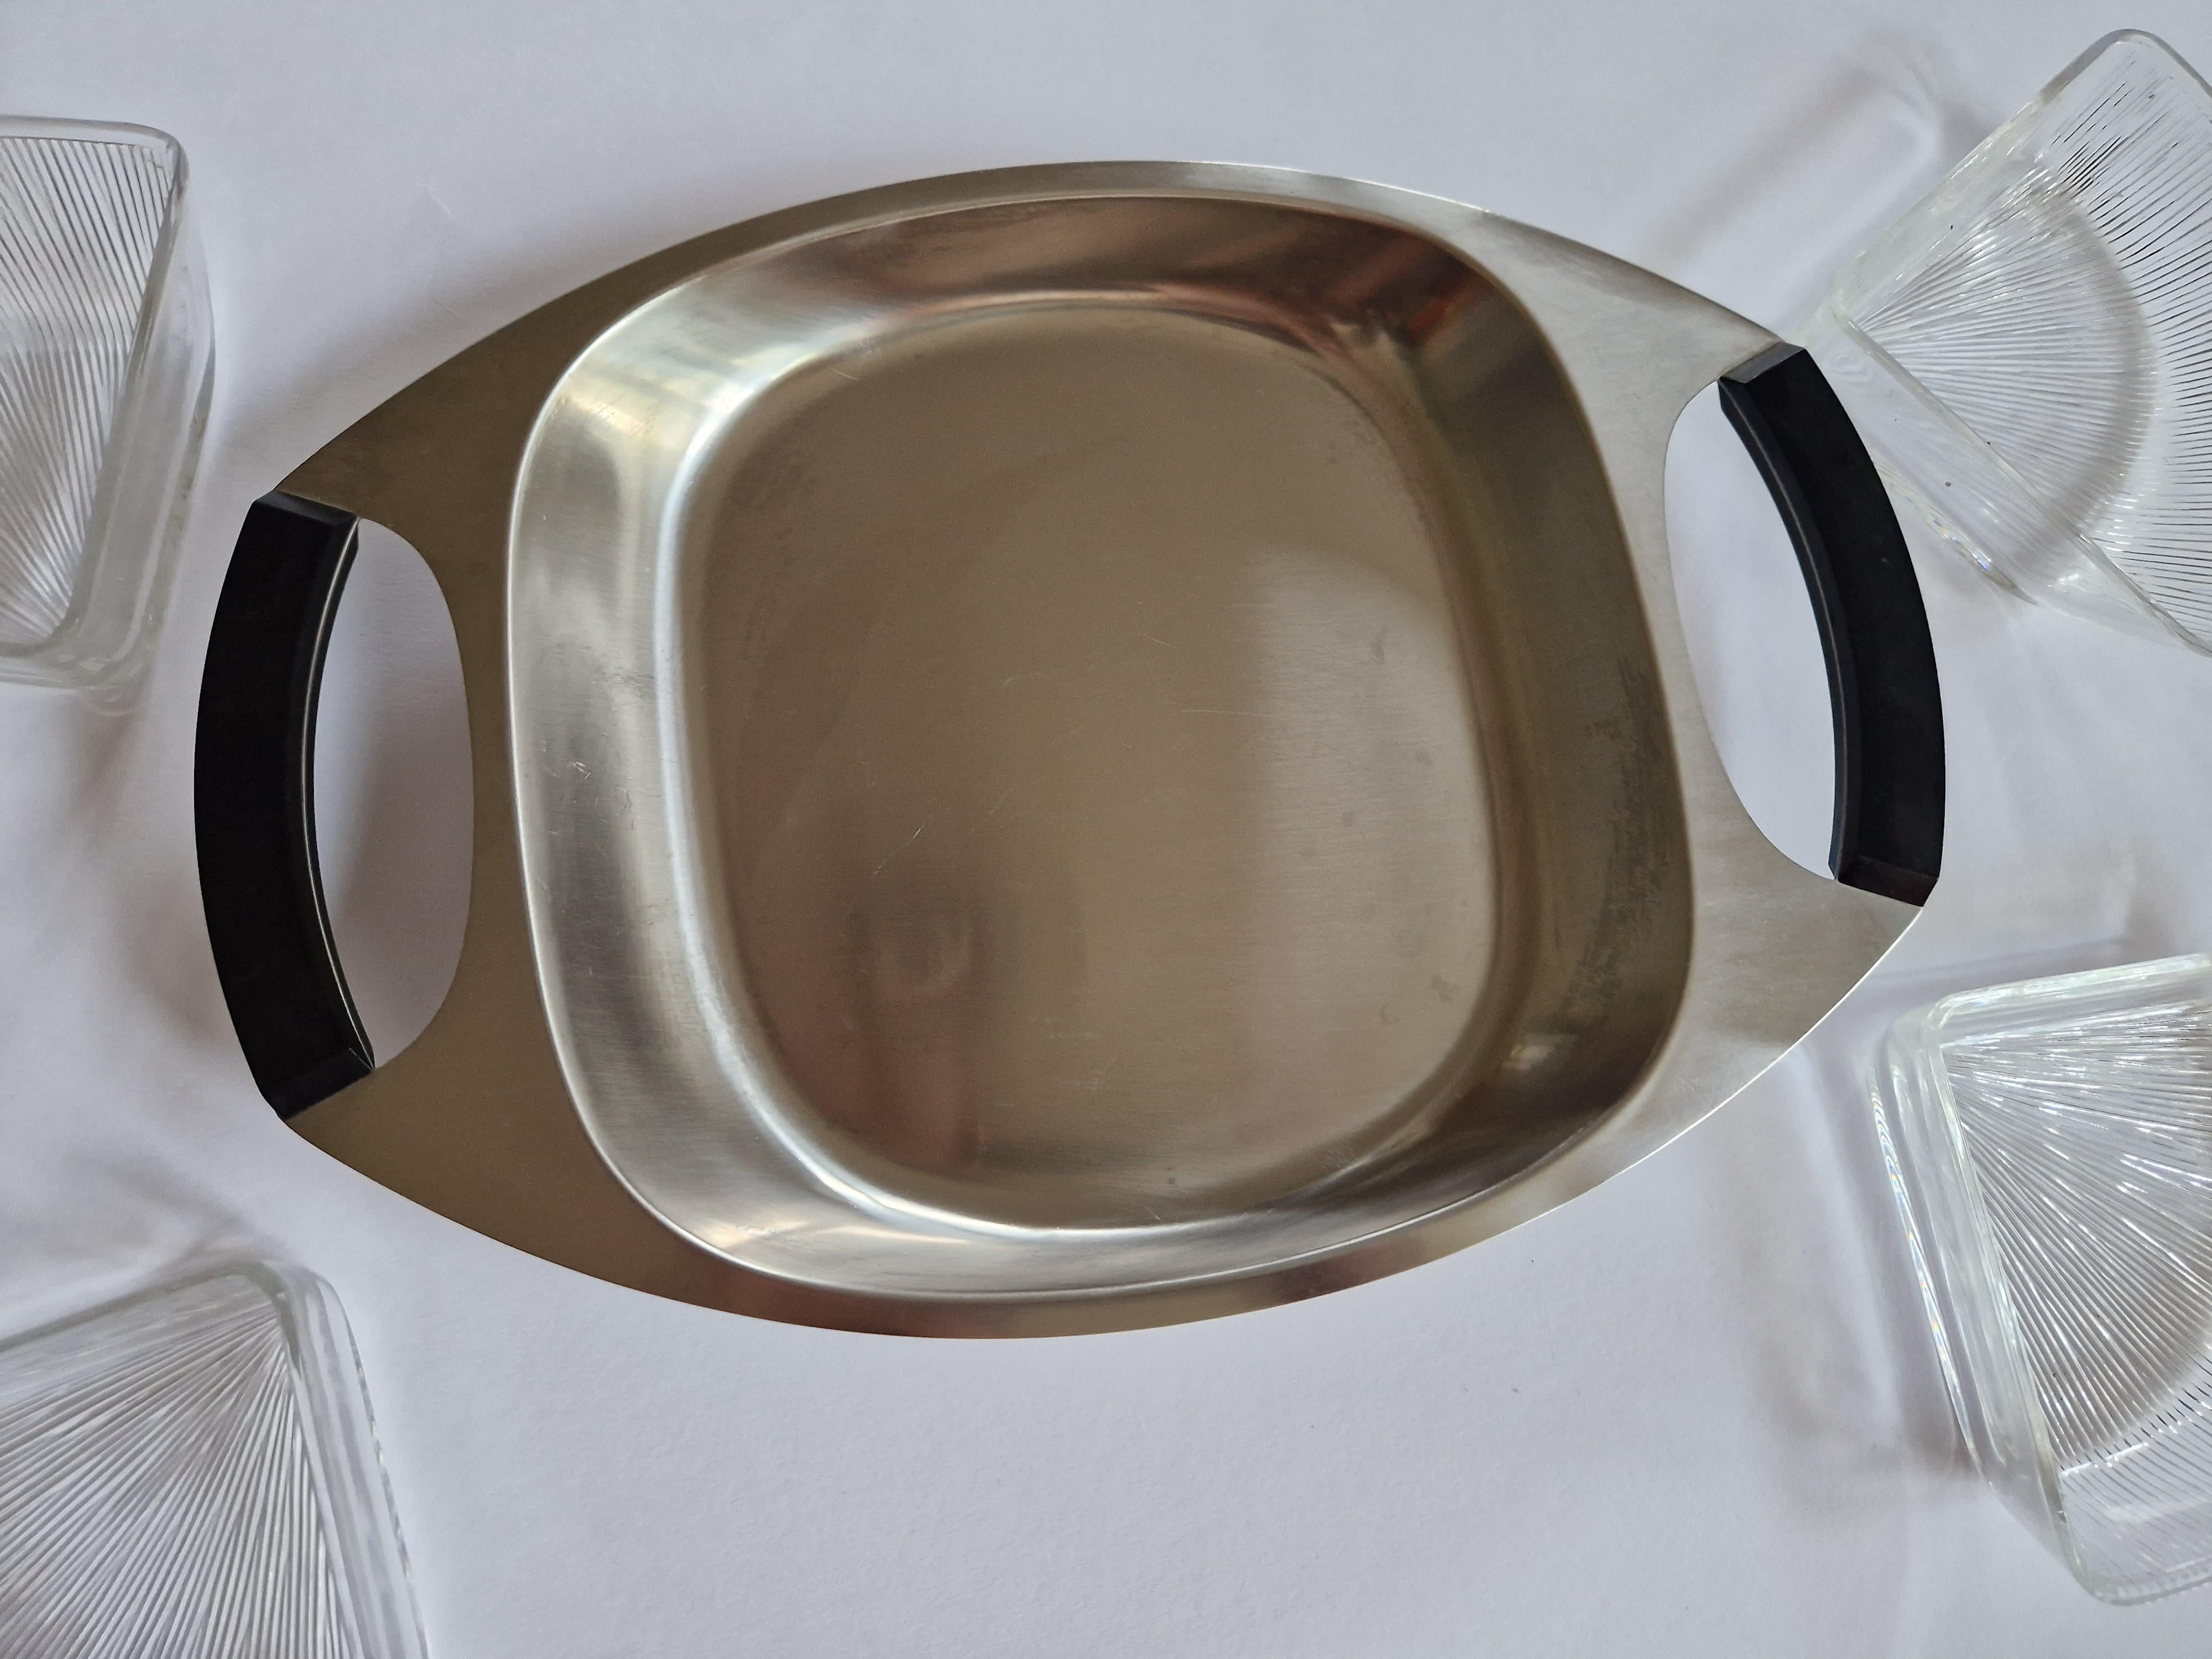 Midcentury Serving Plate Stainless Steel and Glass Cromargan, Germany, 1970s For Sale 4